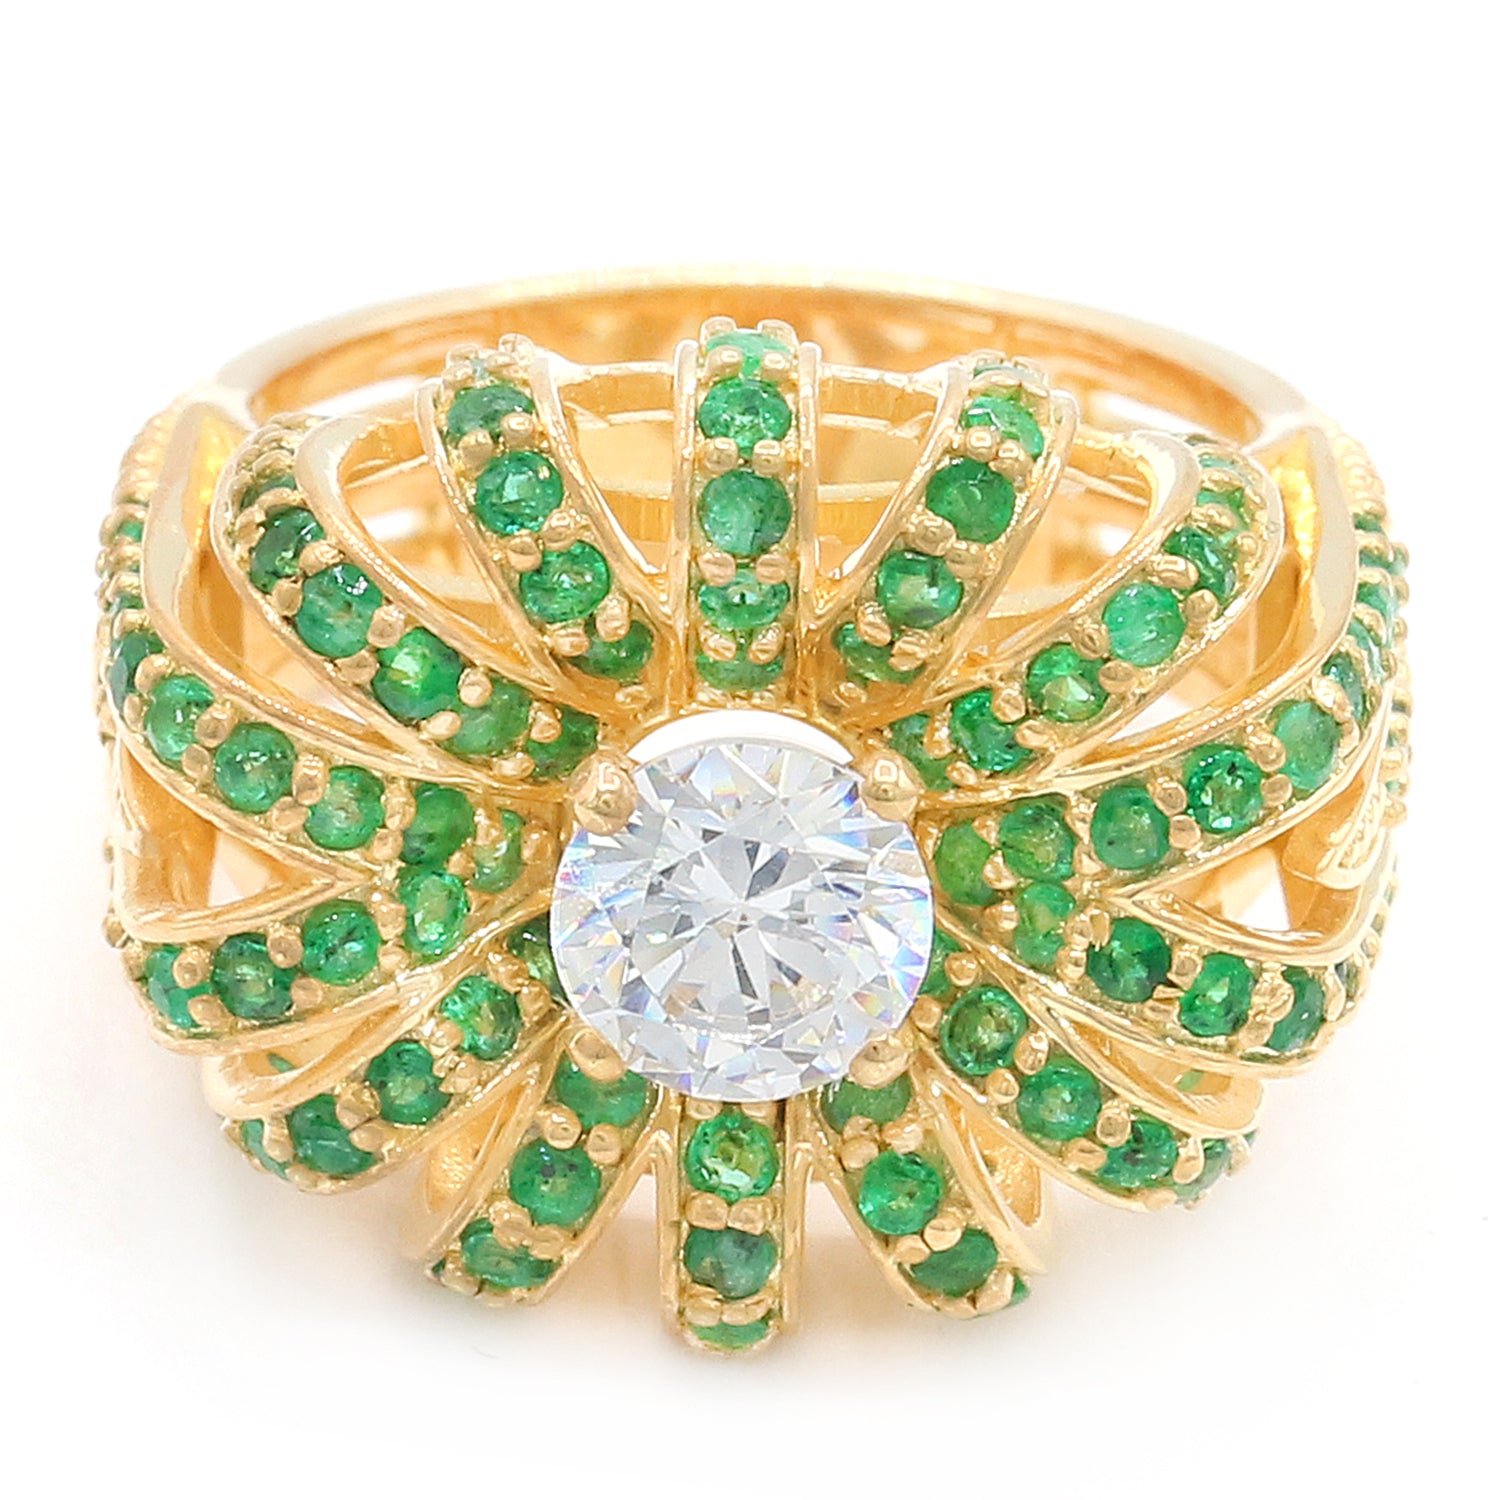 Limited Edition Gems en Vogue Luxe, One-of-a-kind IGI Certified Over 1ct Lab Grown Diamond & Emerald Ring